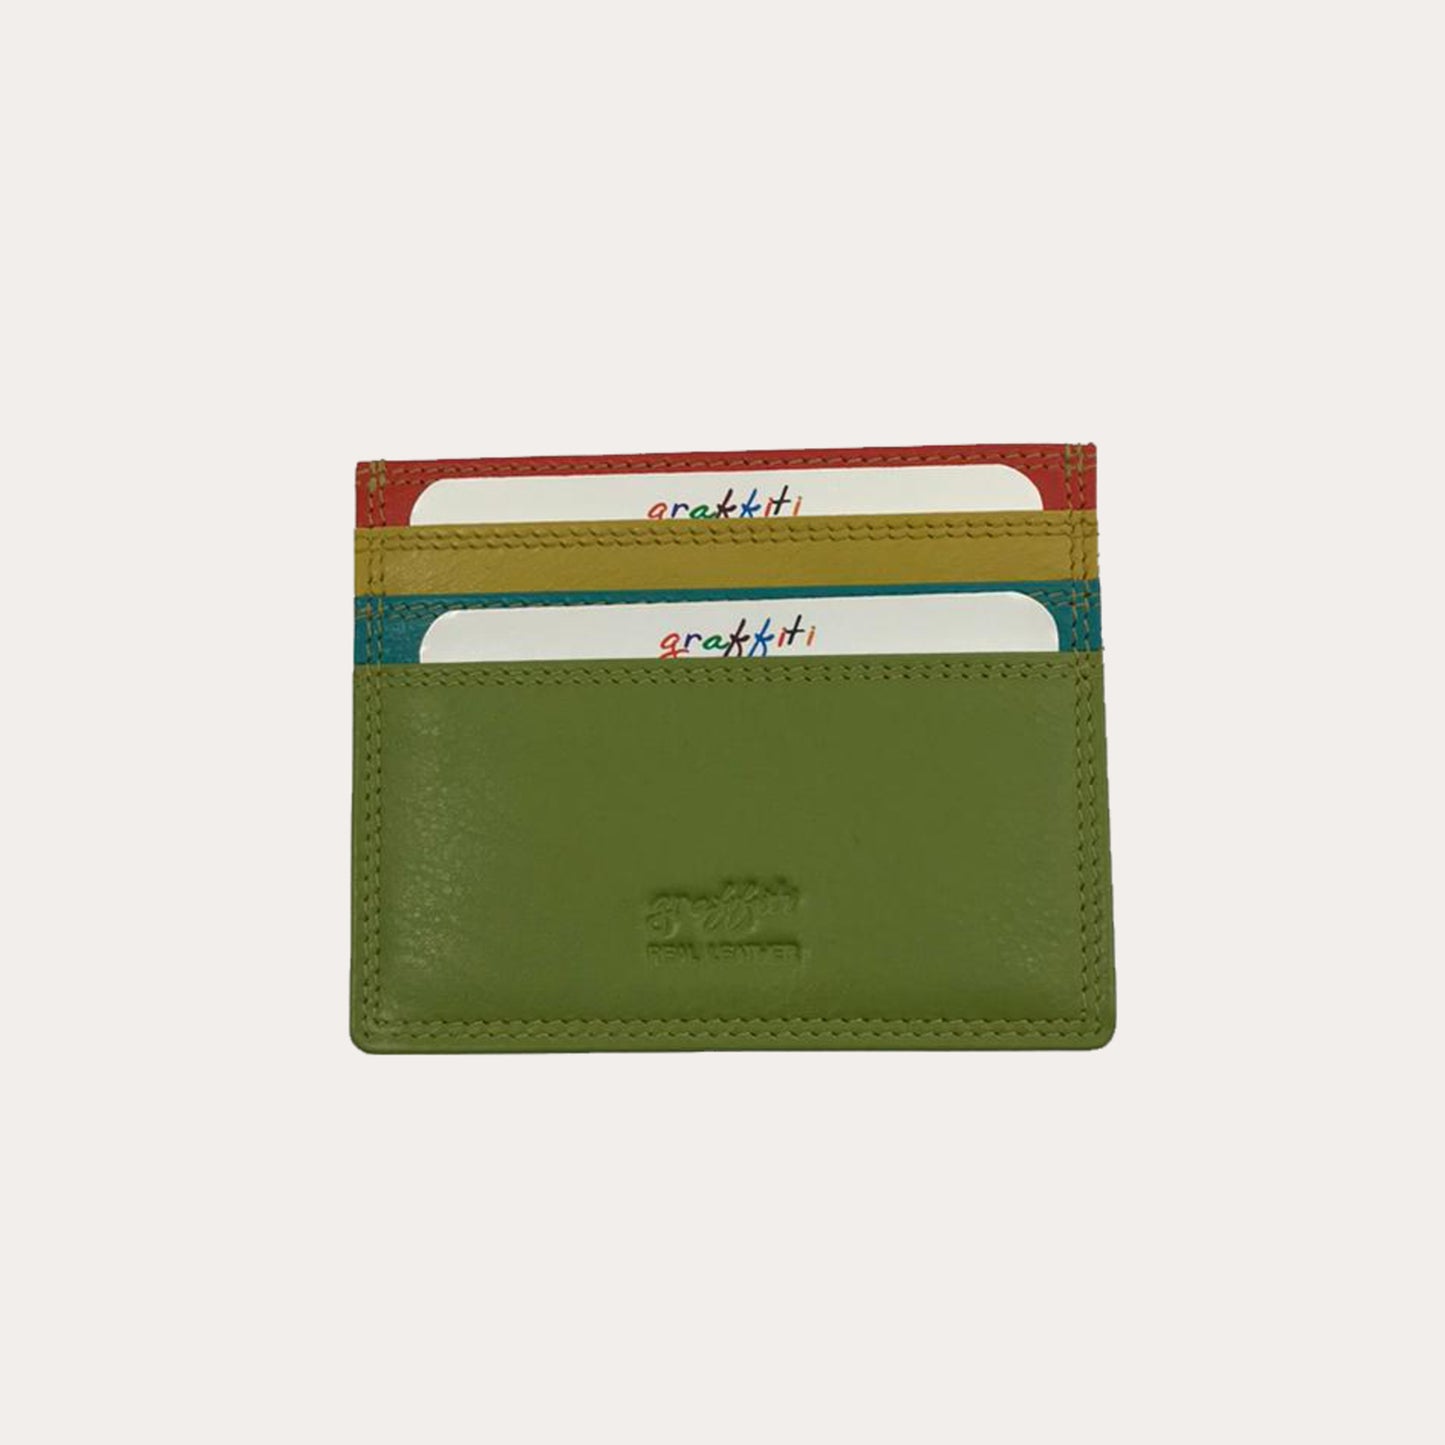 Pacific Leather Credit Card Holder